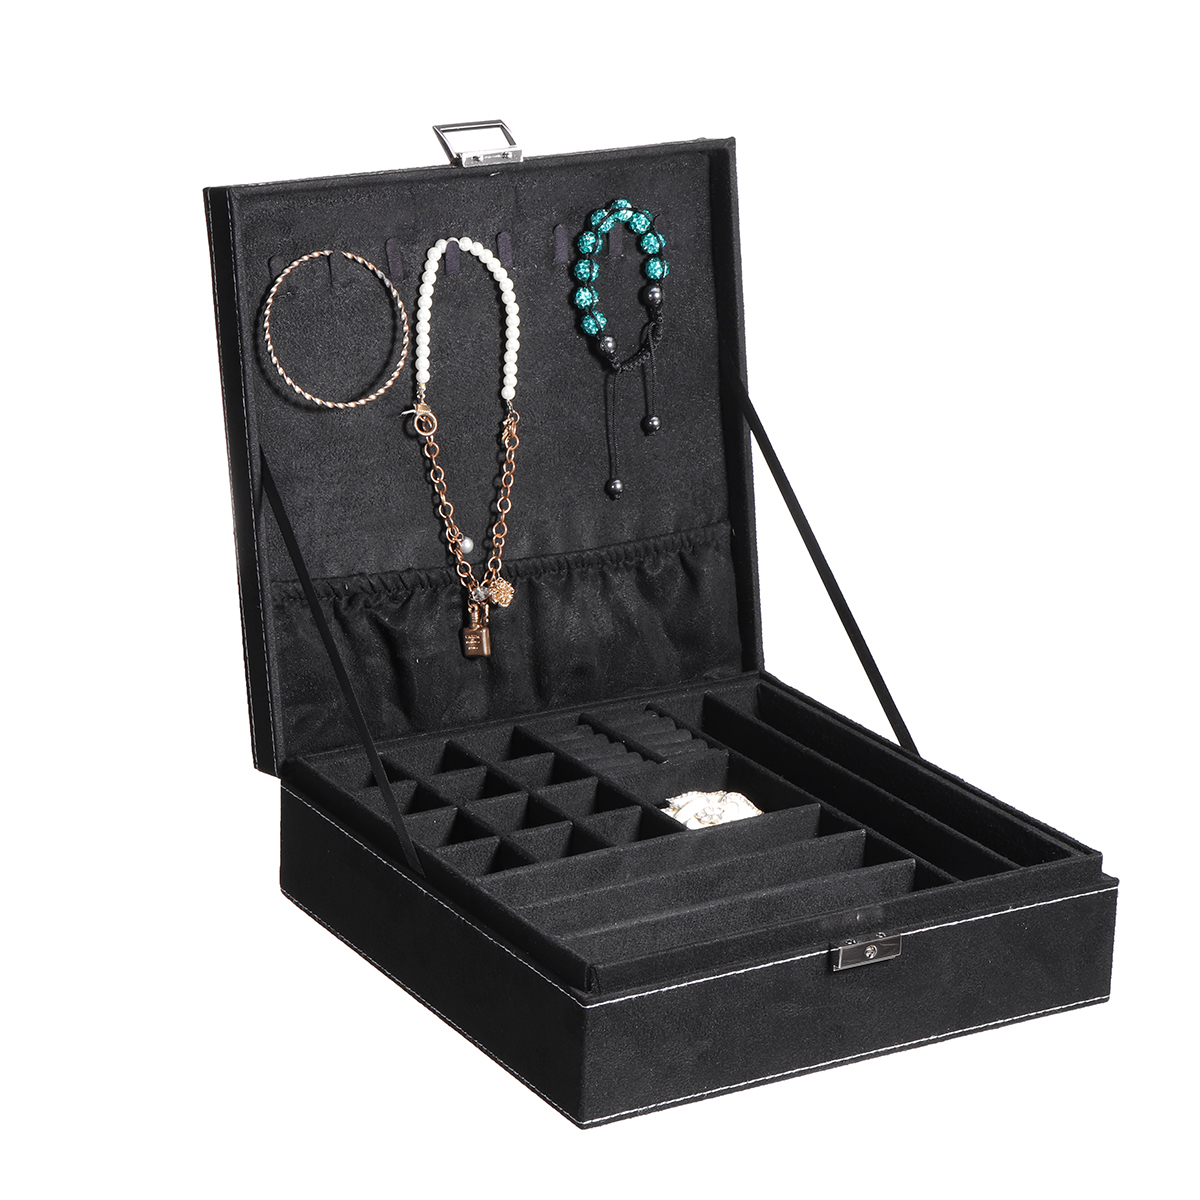 Multi-function-Vintage-Jewelry-Box-Organizers-Two-layer-Lockable-Jewelry-Display-Storage-Case-1855370-30